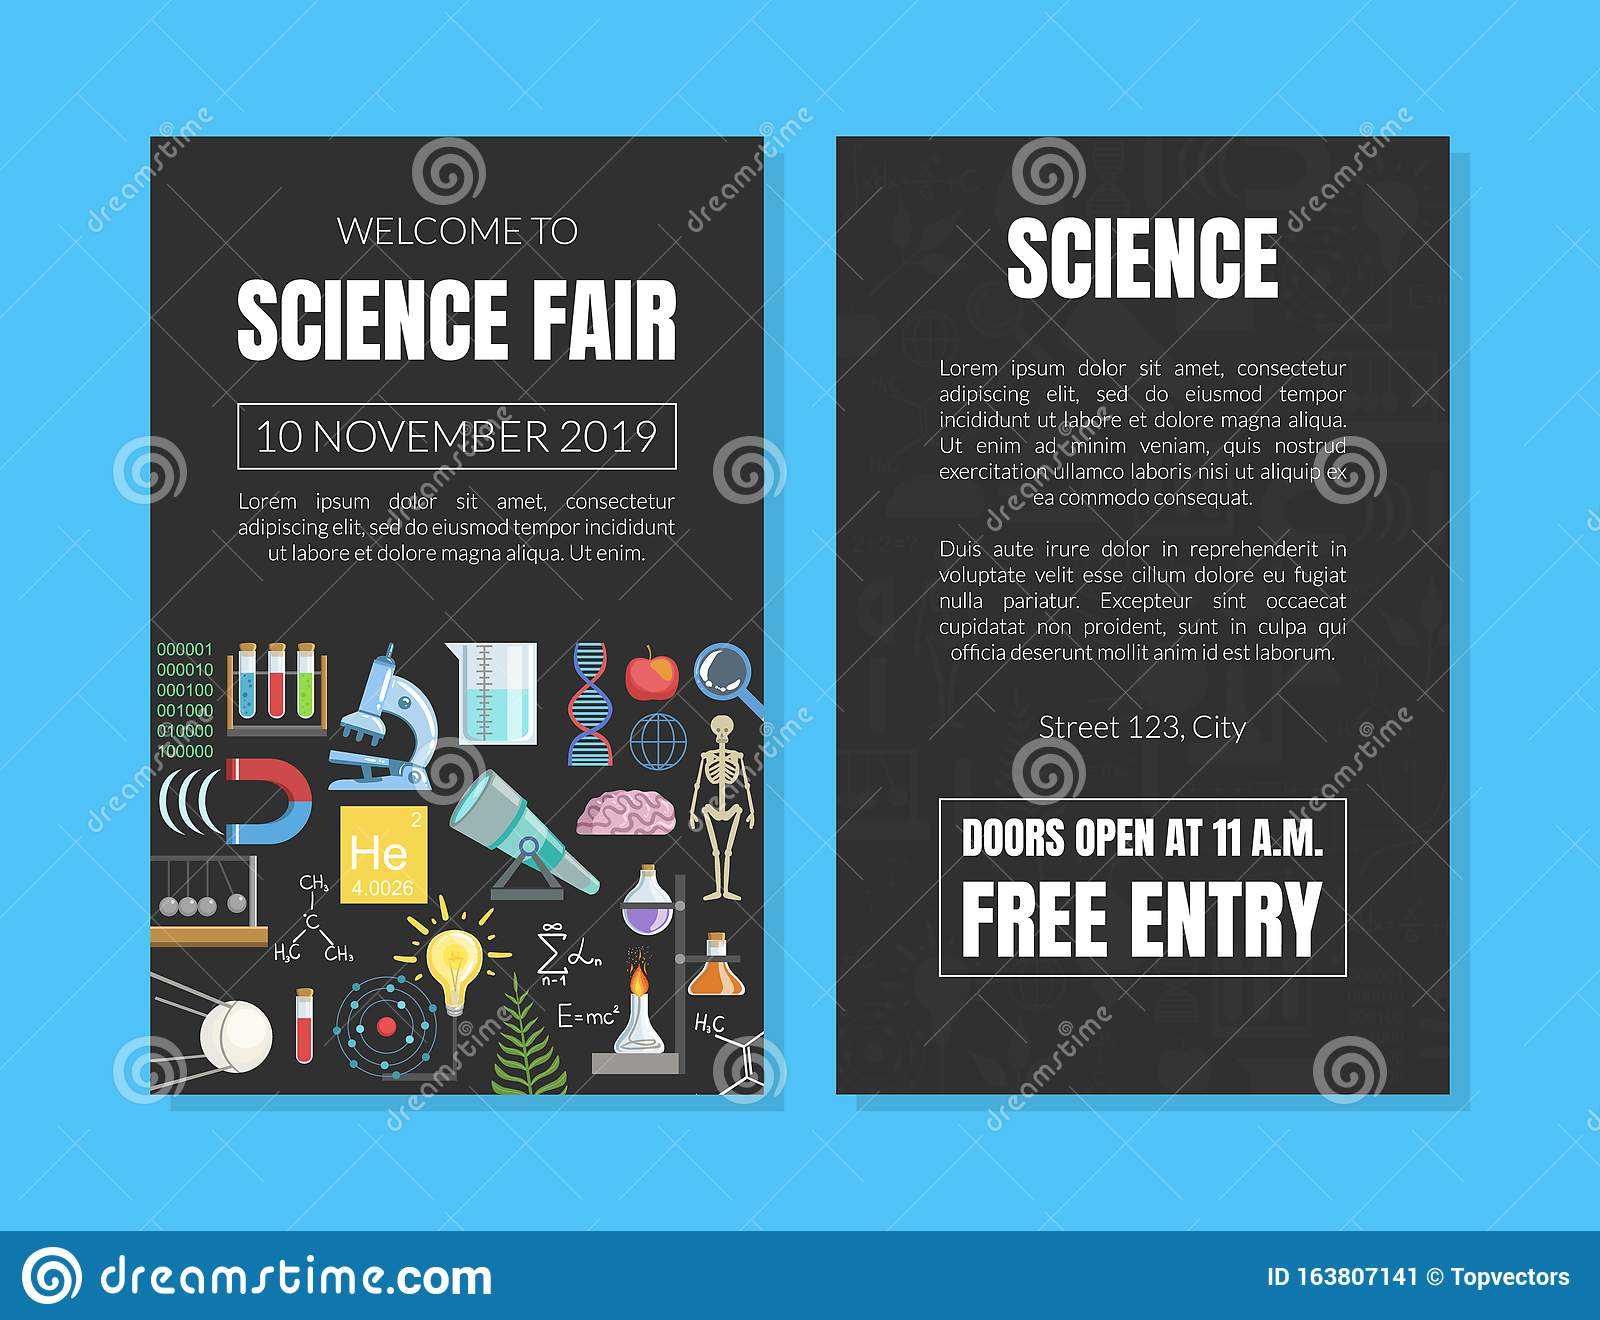 Welcome To Science Fair Invitation Card Template, Scientific With Science Fair Banner Template